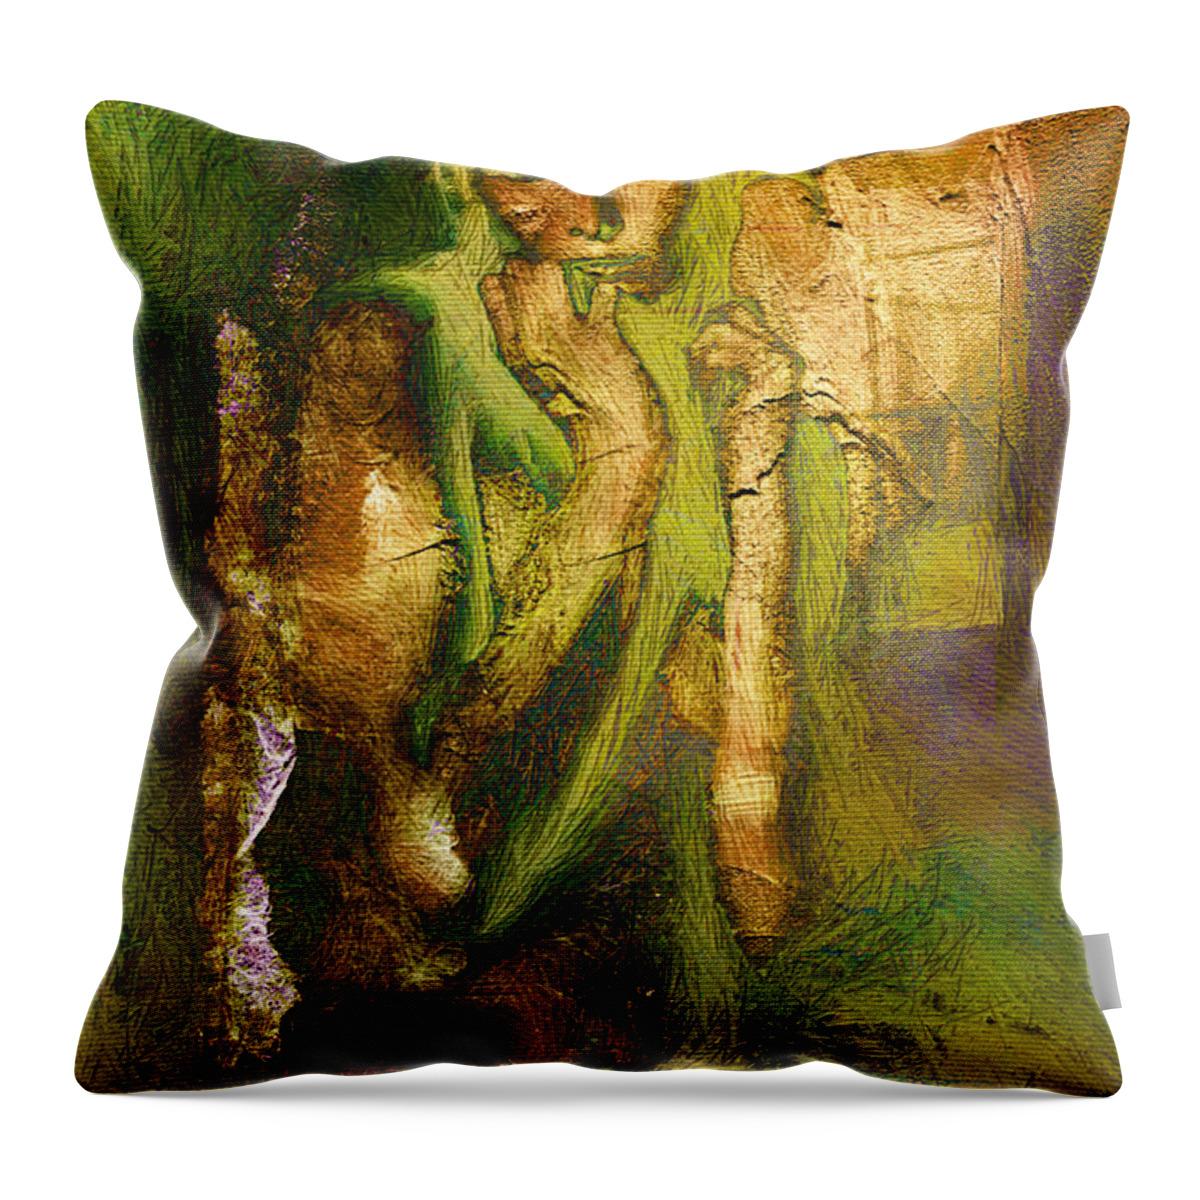 Copper Throw Pillow featuring the digital art Copper Hair by Andrea Barbieri